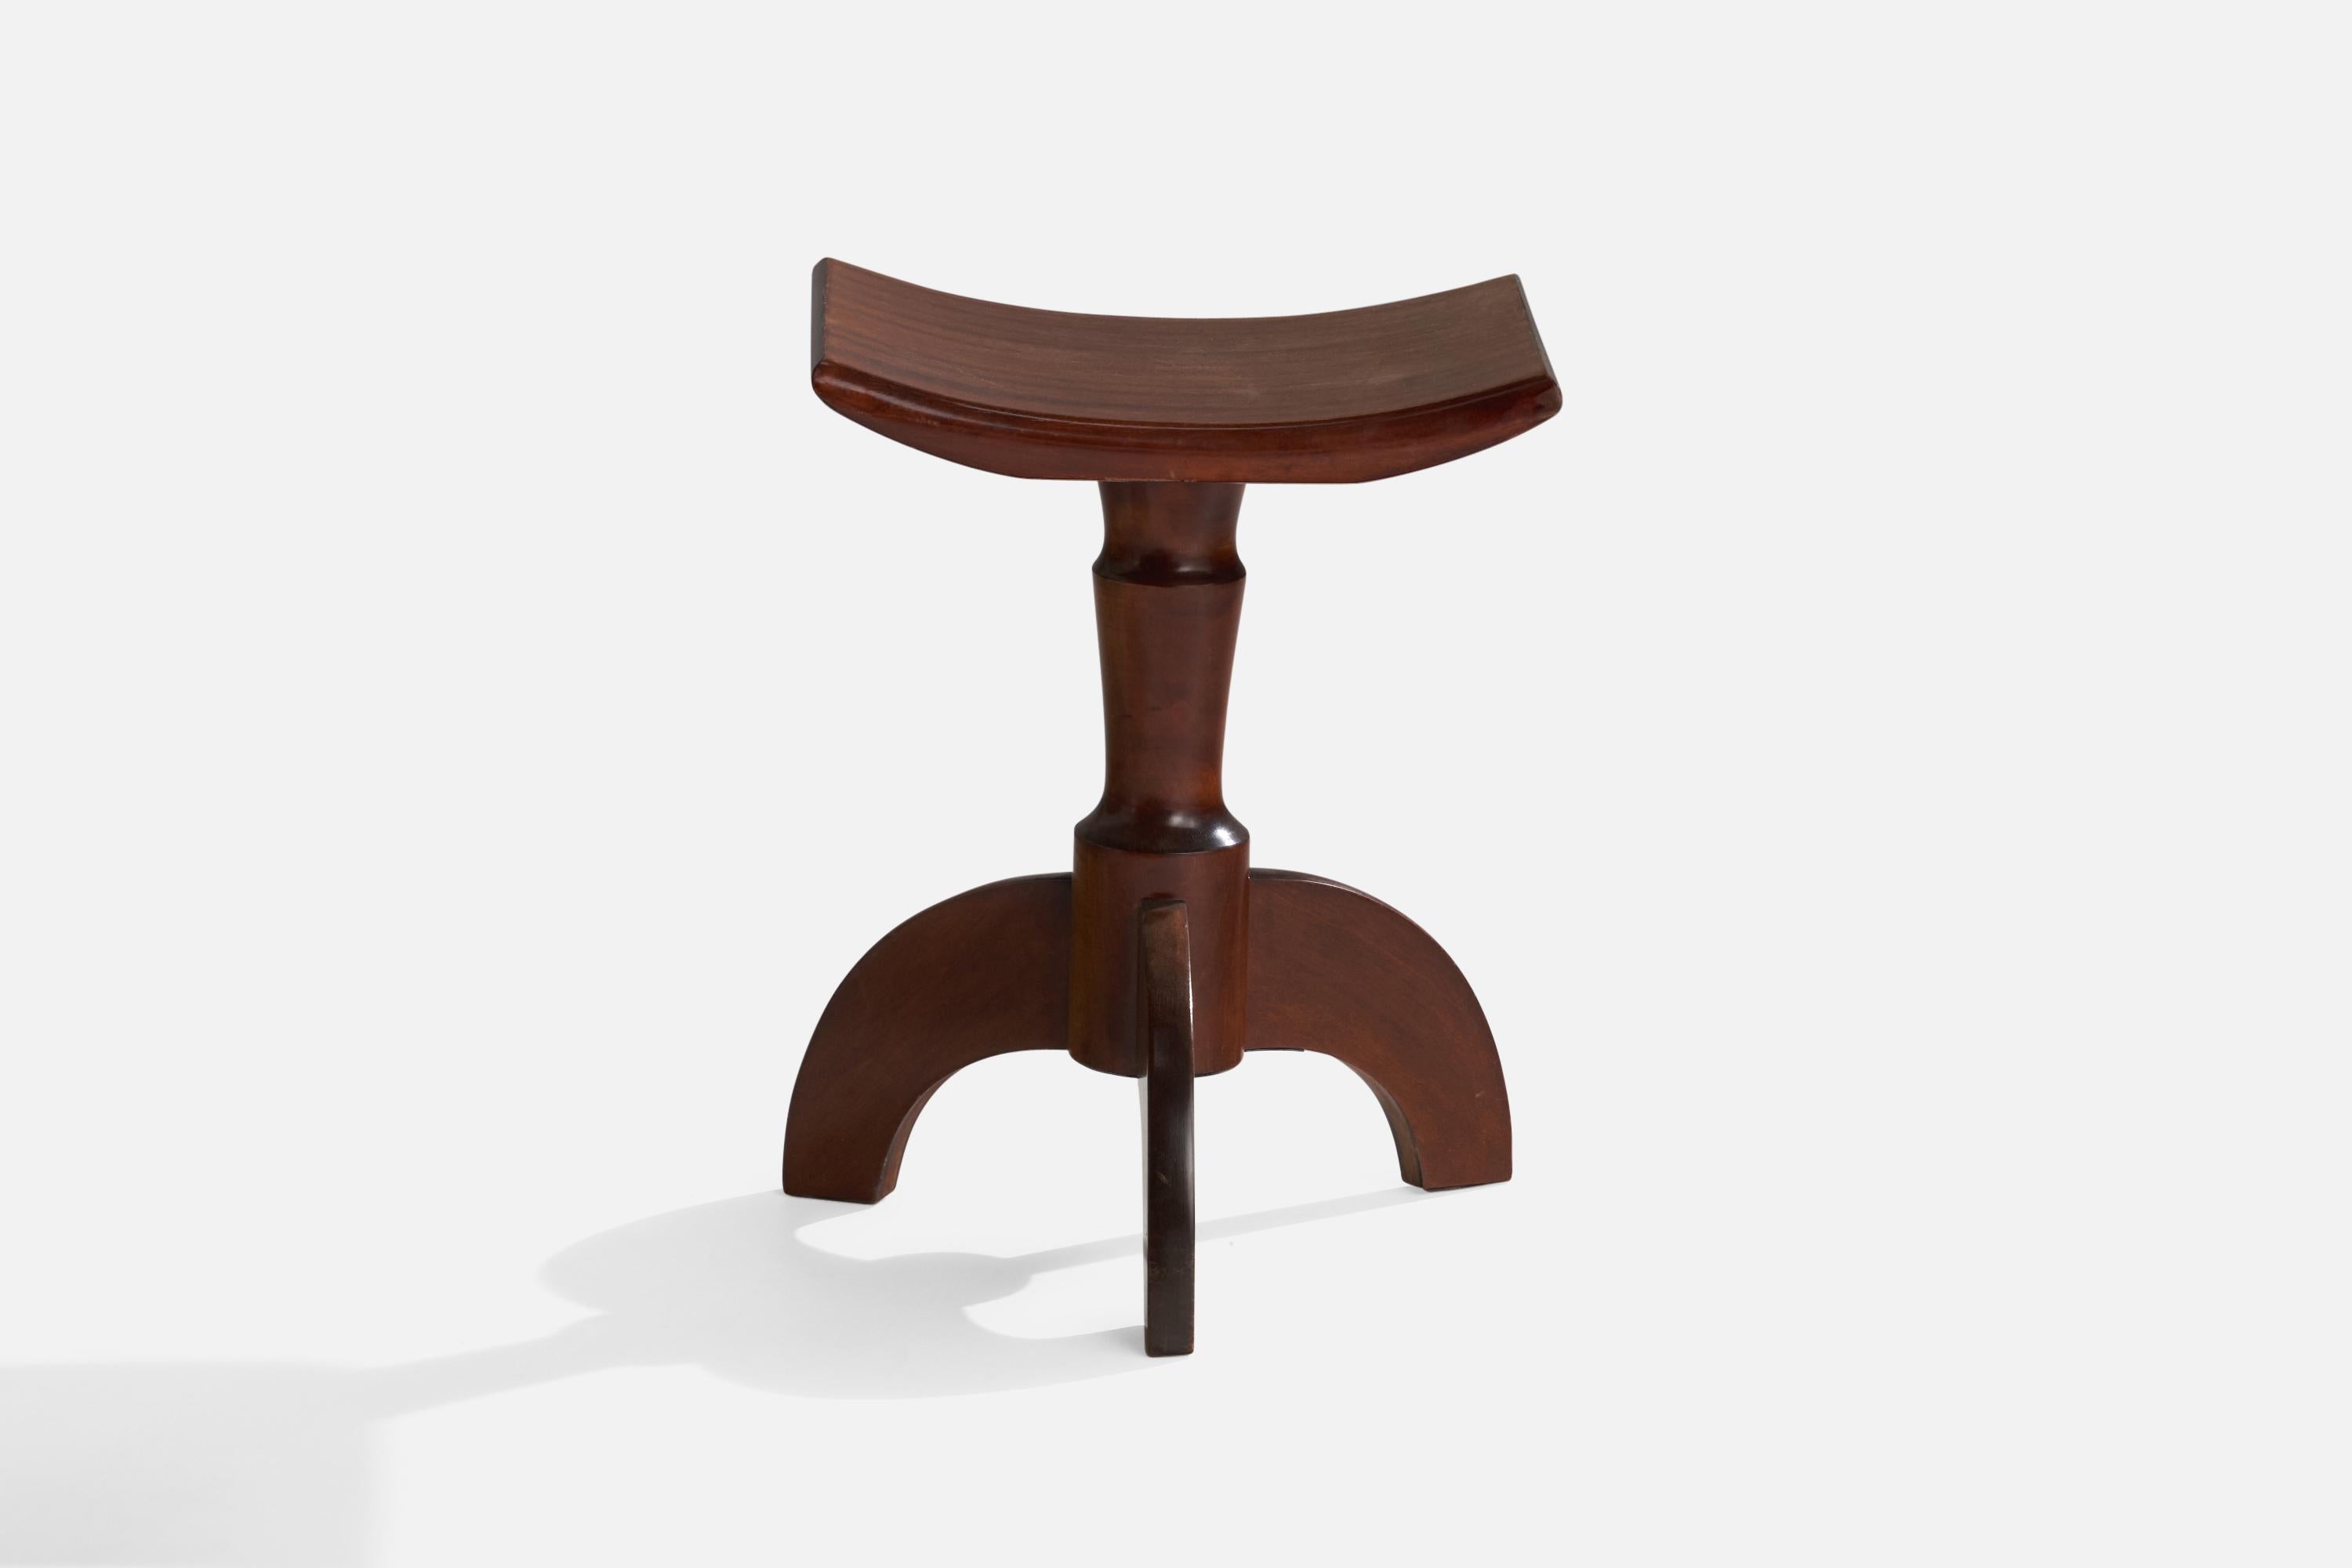 A dark-stained birch stool designed and produced in Sweden, 1930s.